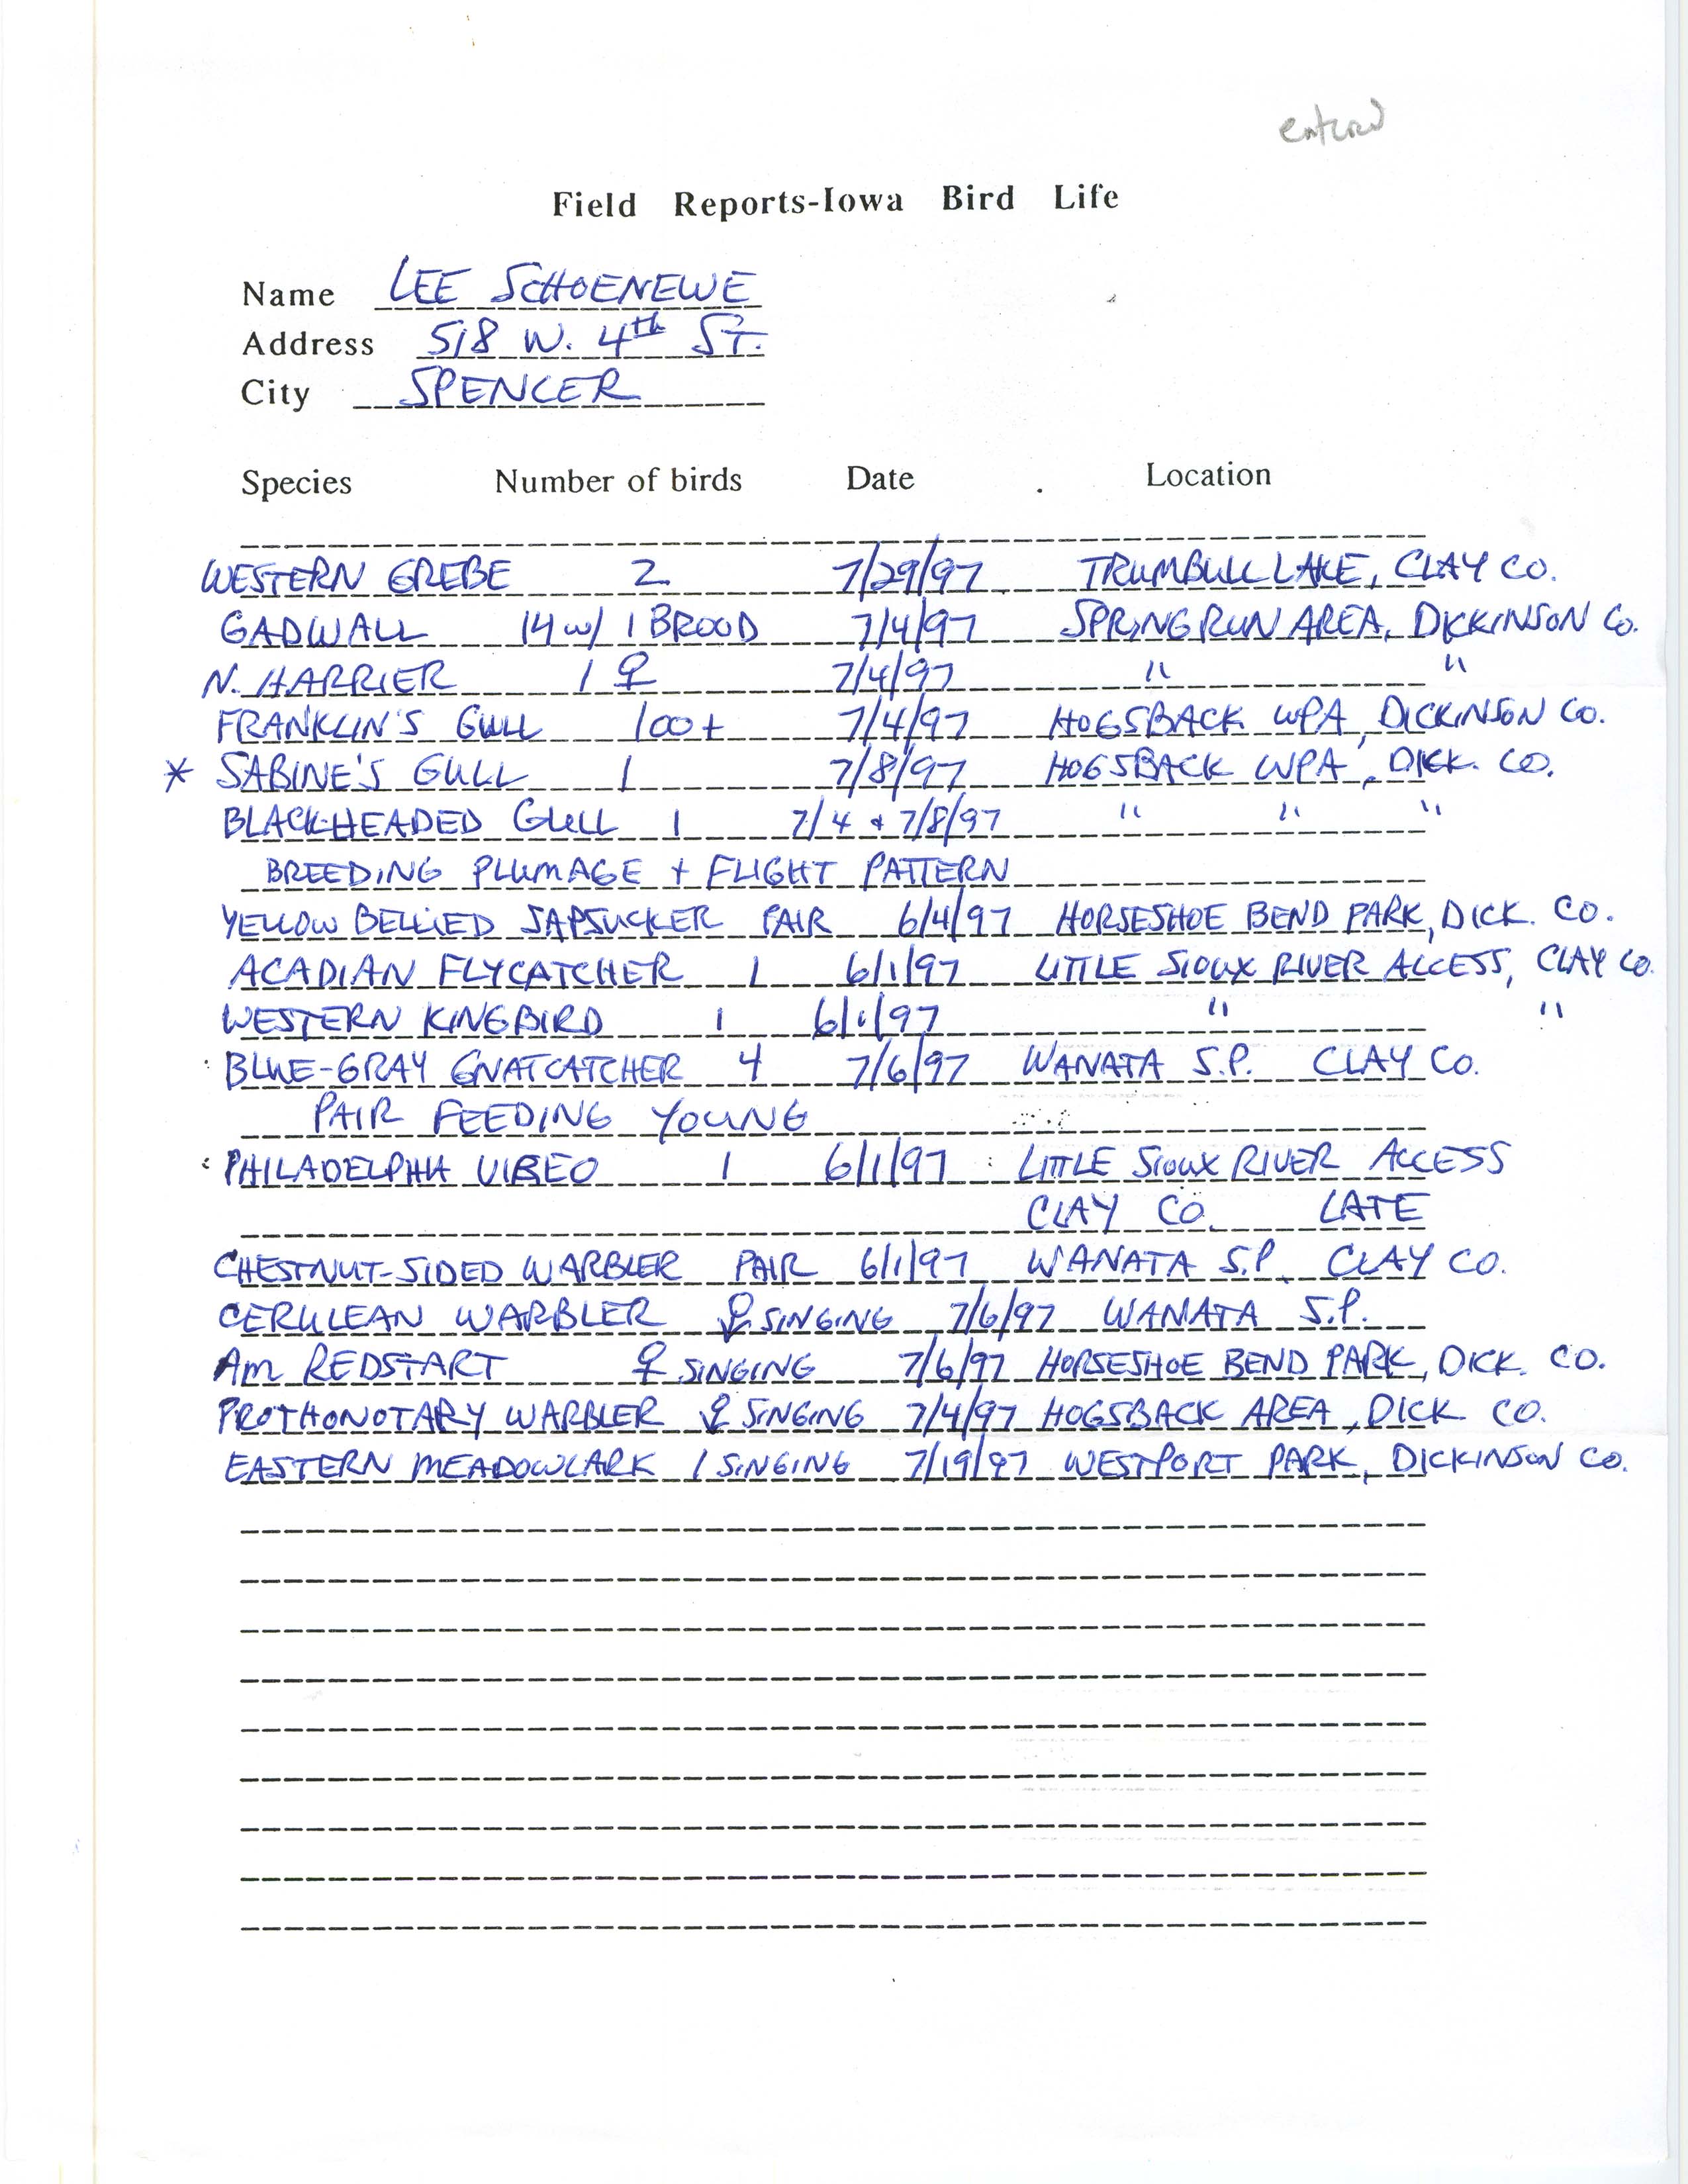 Field notes contributed by Lee A. Schoenewe, summer 1997